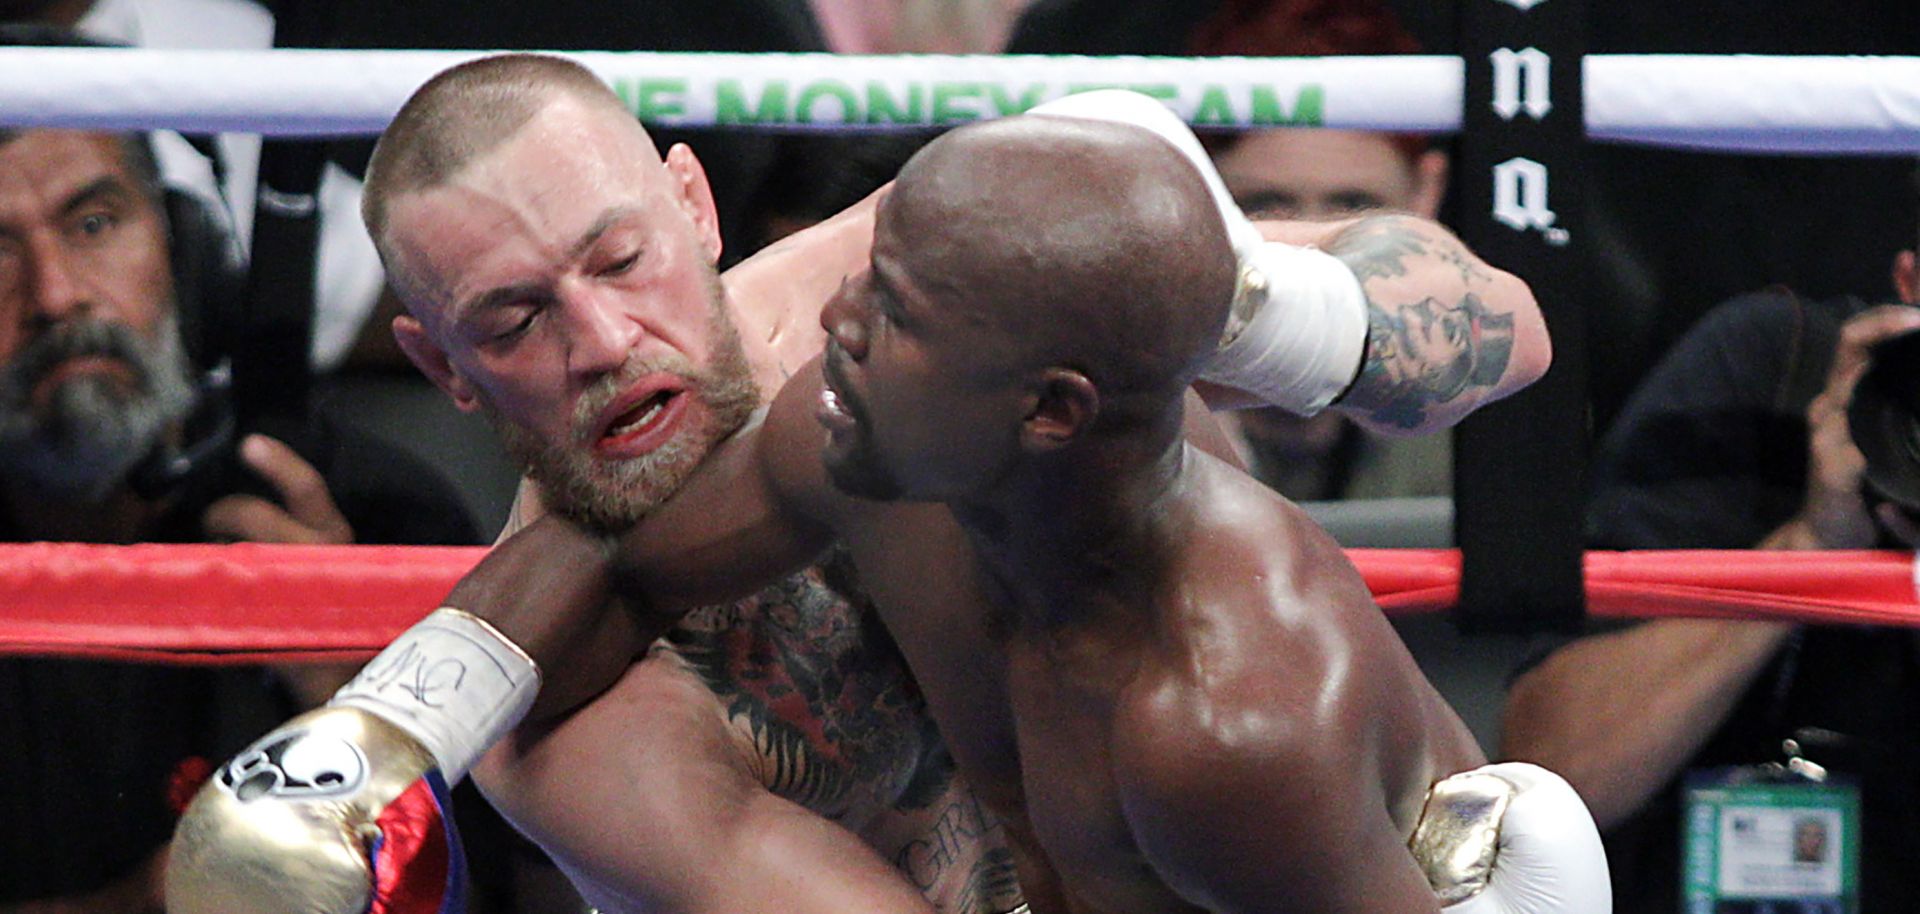 Mixed martial arts star Conor McGregor (L) competes with boxer Floyd Mayweather Jr. in Las Vegas on Aug. 26.